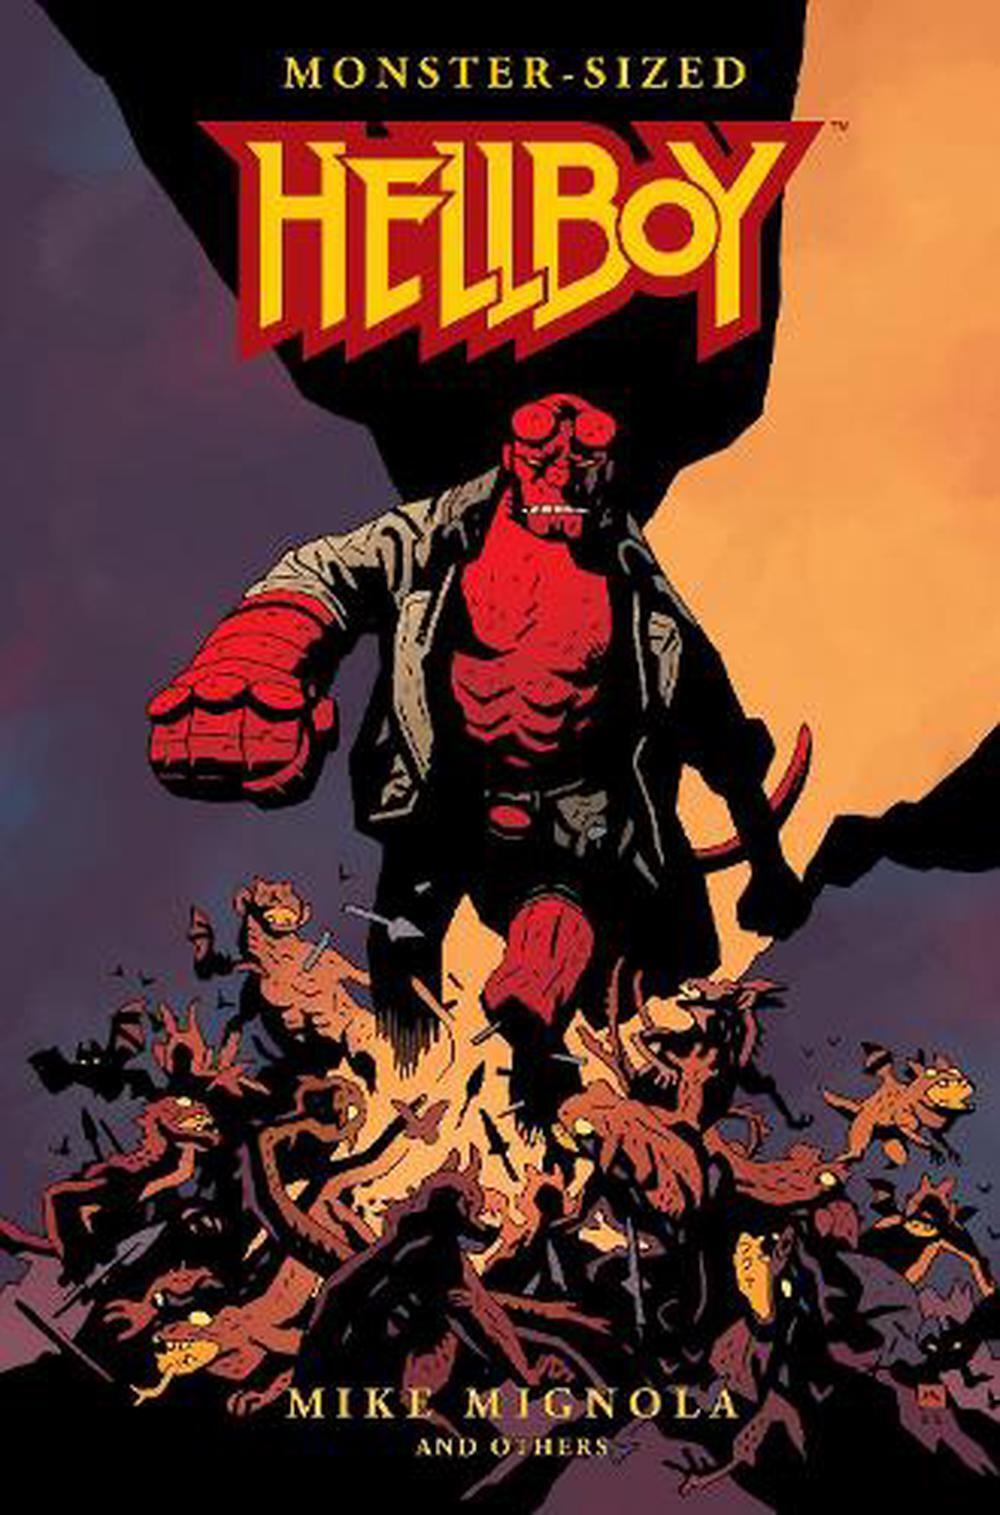 Monster-sized Hellboy by Mike Mignola (English) Hardcover Book